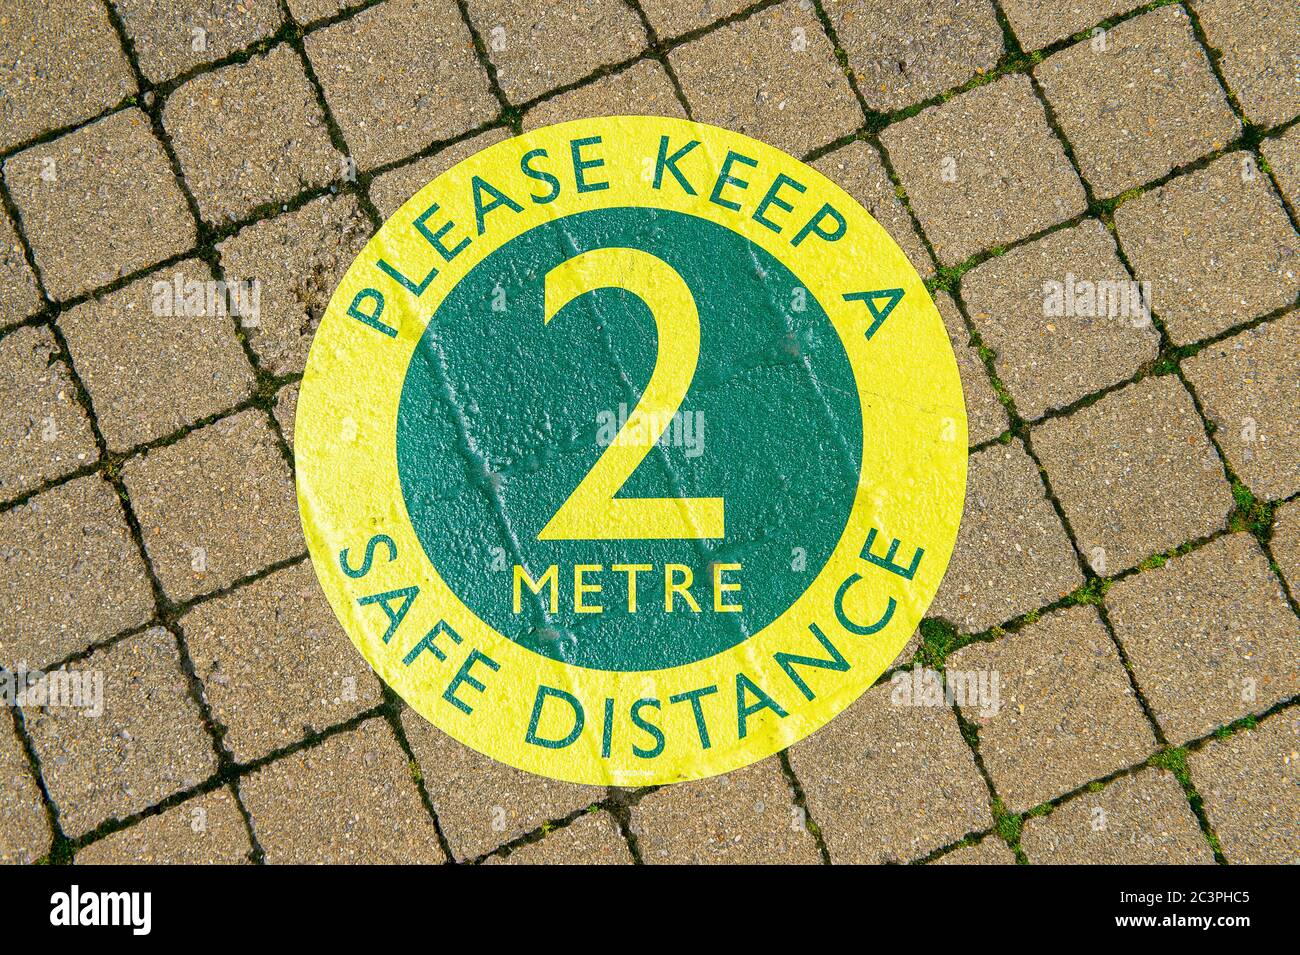 Windsor, Berkshire, UK. 21st June, 2020. Many  retailers have spent a lot of money on social distancing signs for a distance of 2 metres, however, as pressure grows on the Government for the 2 metre rule to be scrapped or reduced to 1 metre, this may mean further expenditure by retailers on new point of sale signs. Credit: Maureen McLean/Alamy Stock Photo